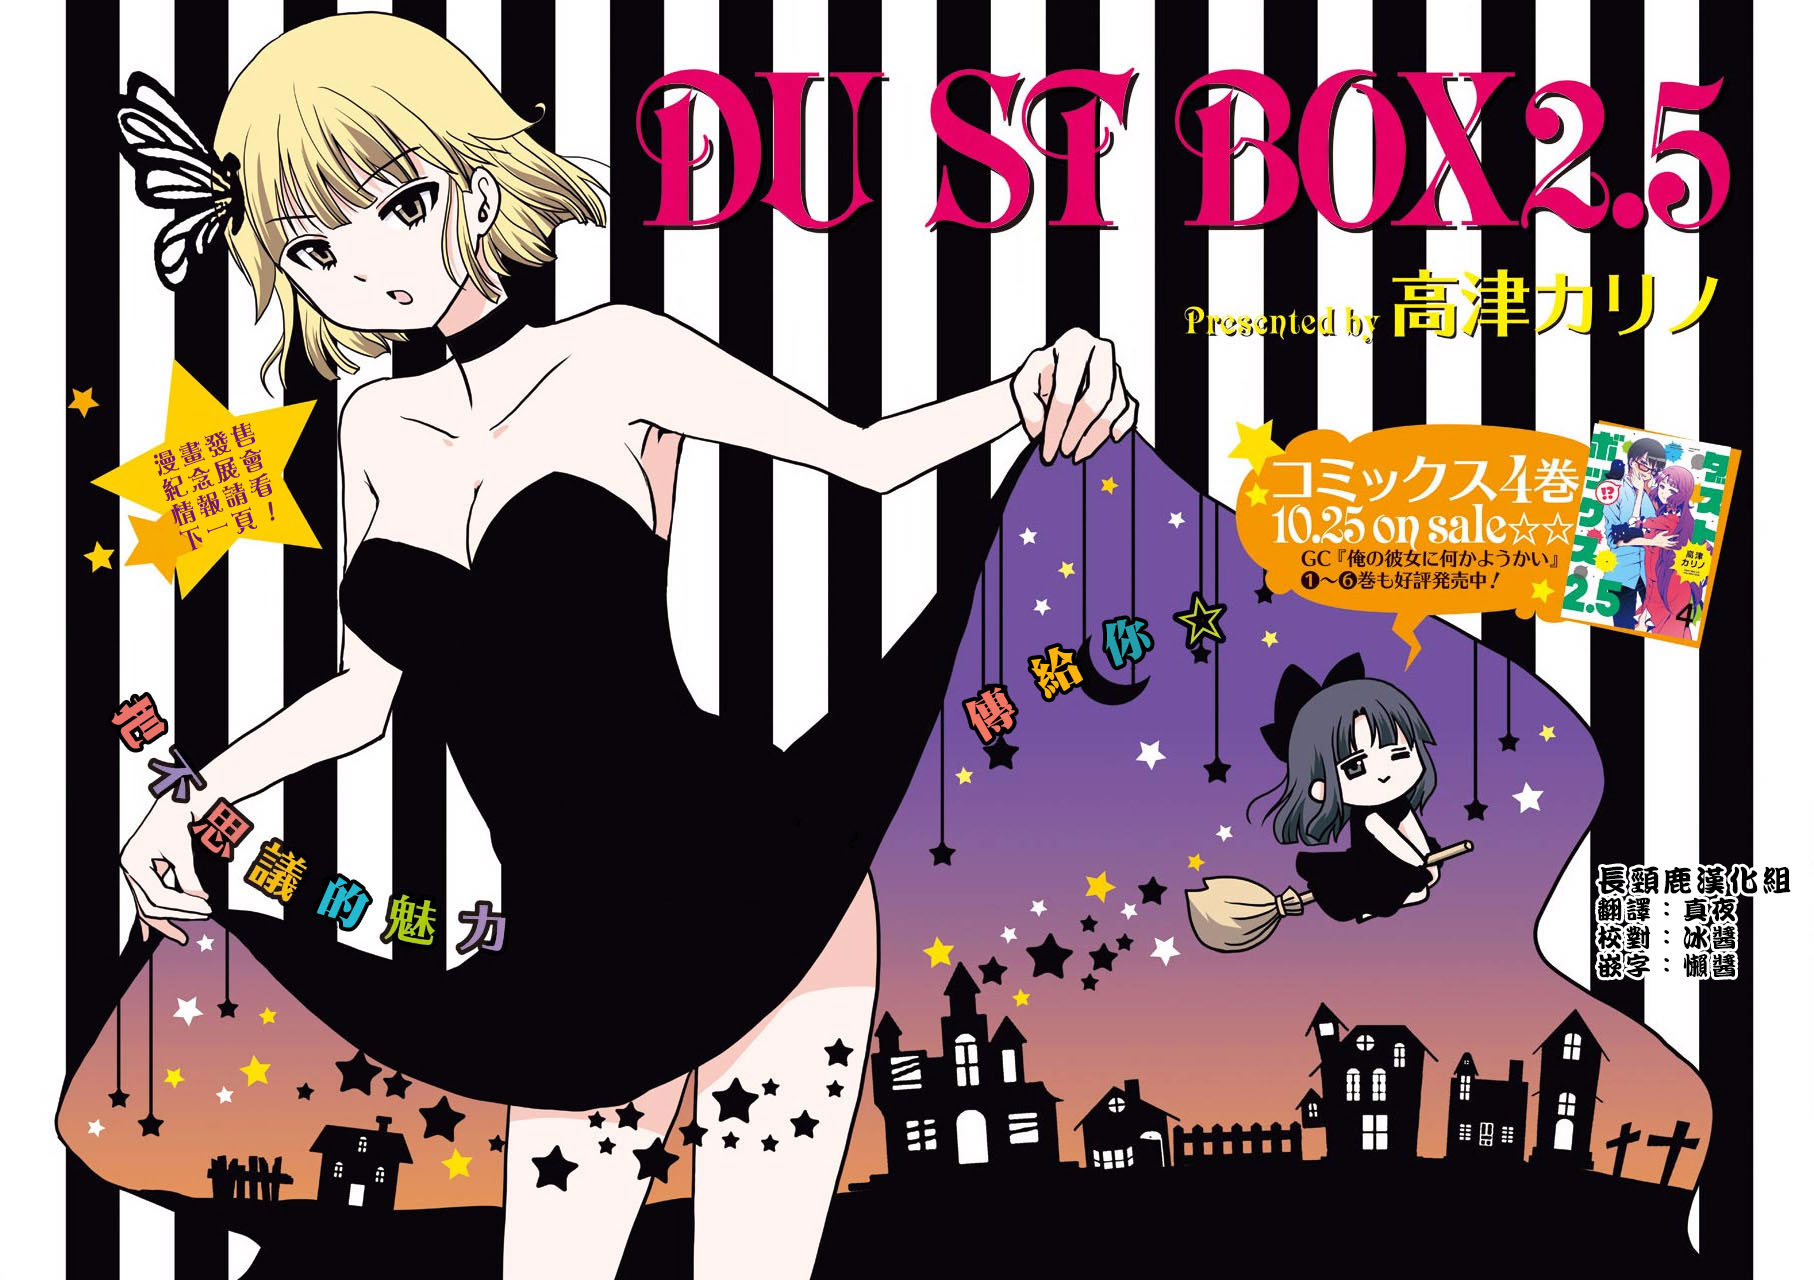 DustBox2.5 - 第82話 - 3